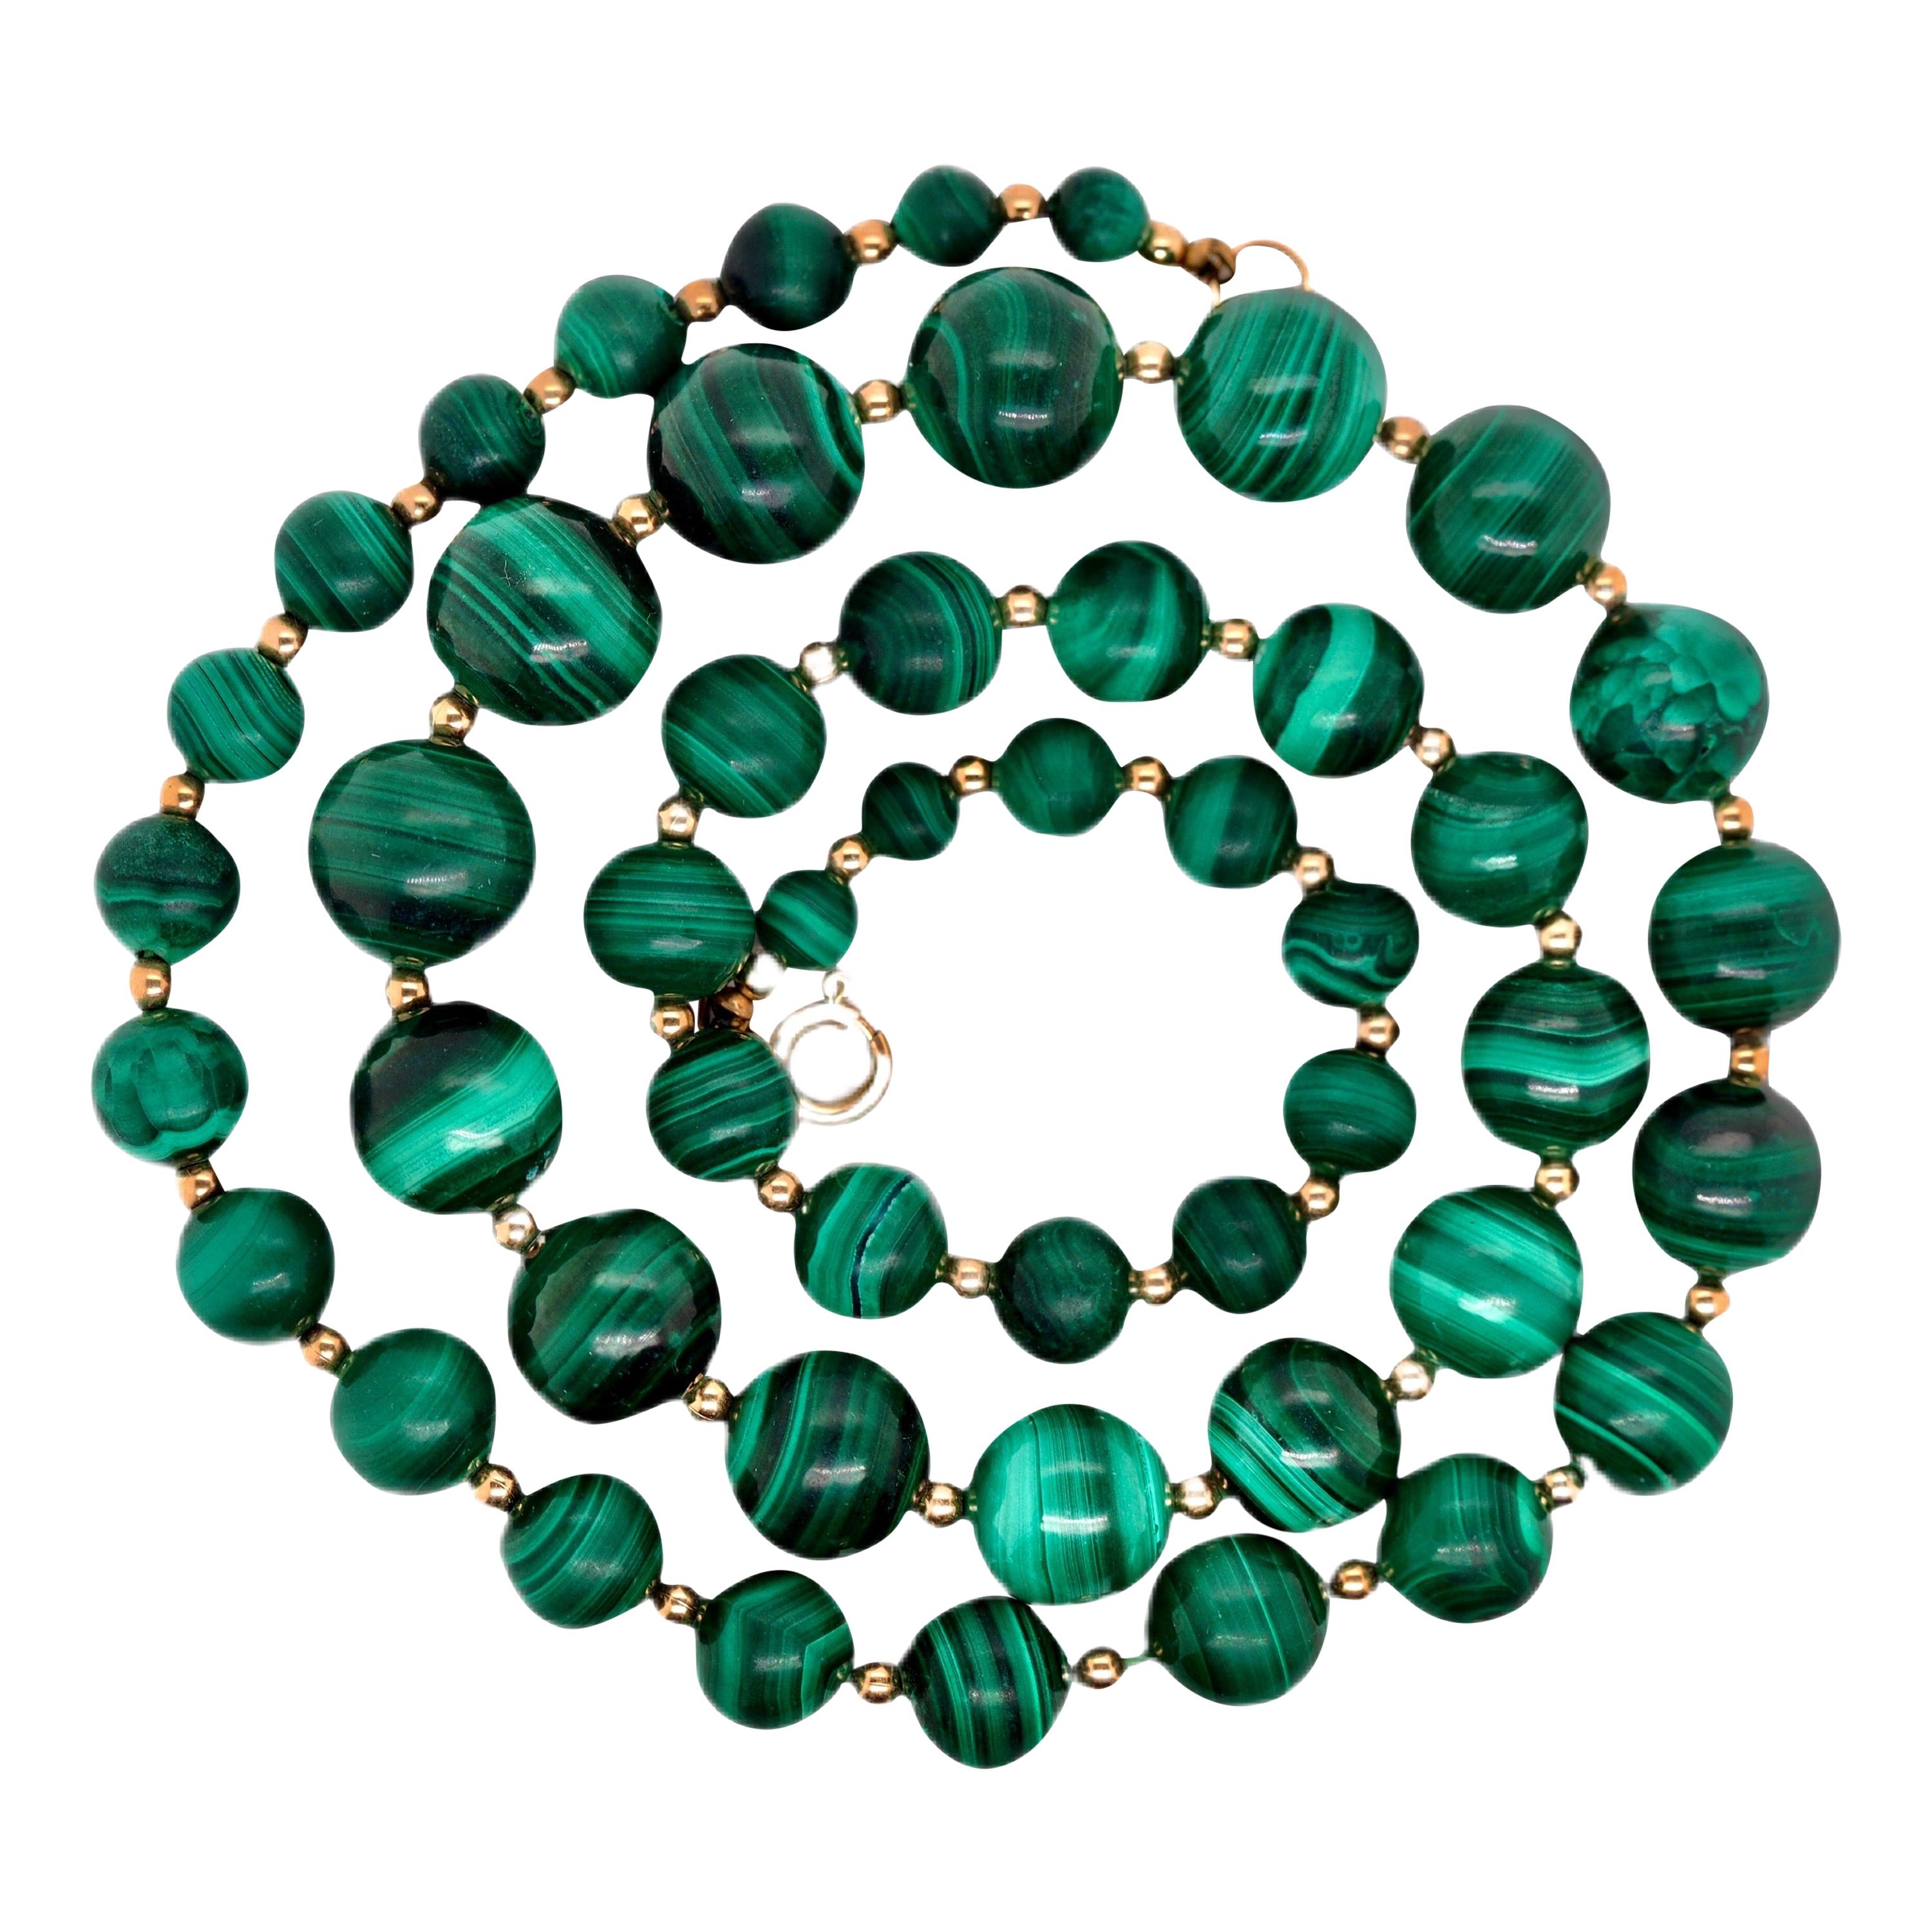 Graduated Malachite Bead Necklace Accented by Gold Filled Beads